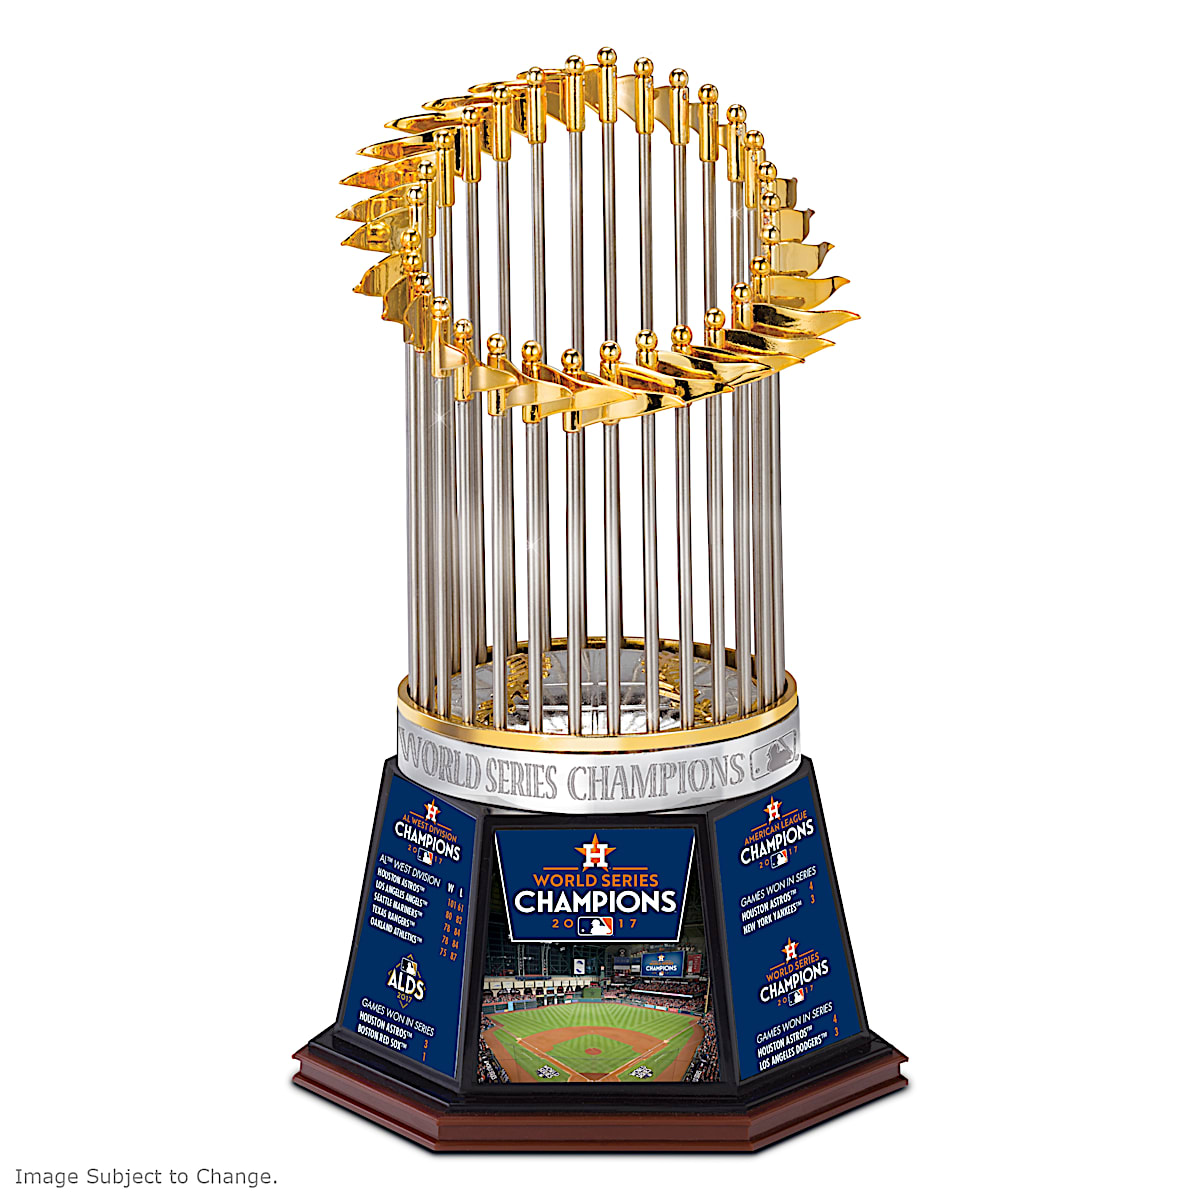 Houston Astros World Series PNG, Astros Champions